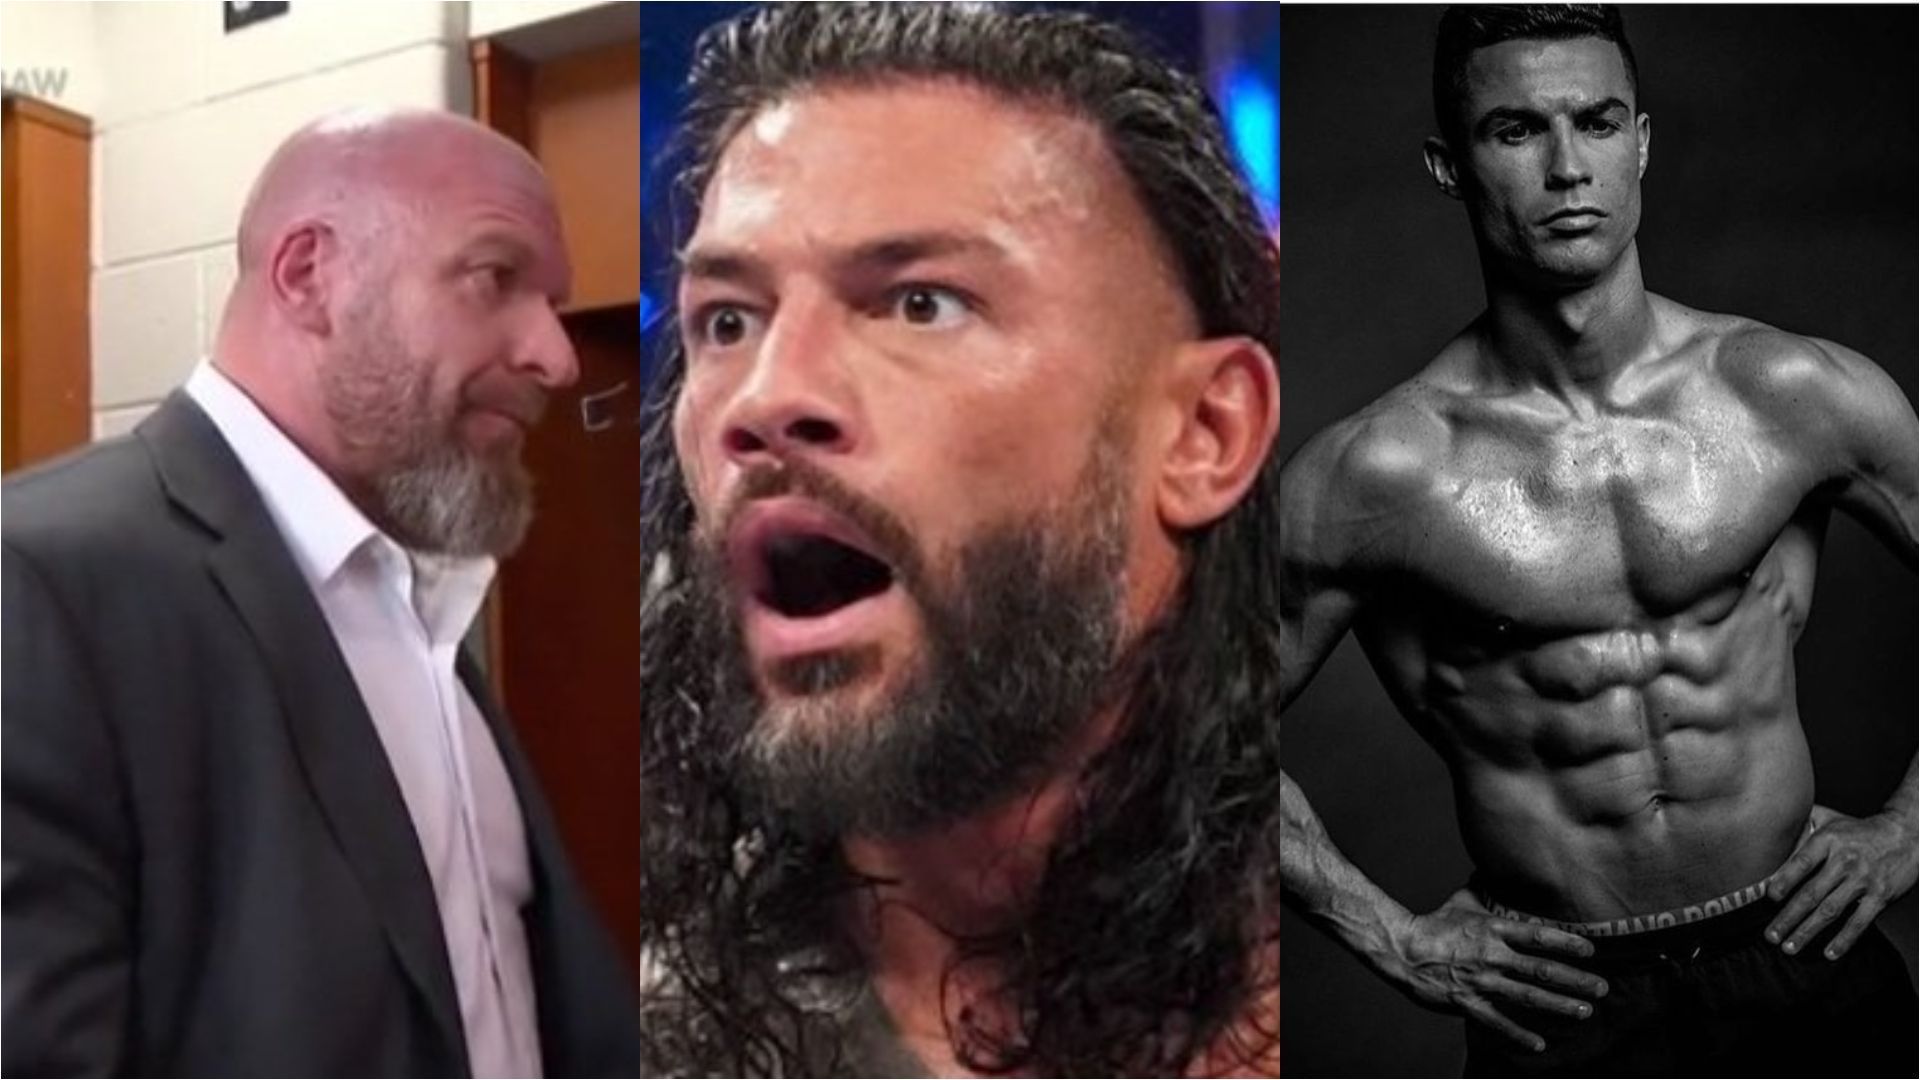 Night Of Champions 2023 could be a wild night within and beyond WWE